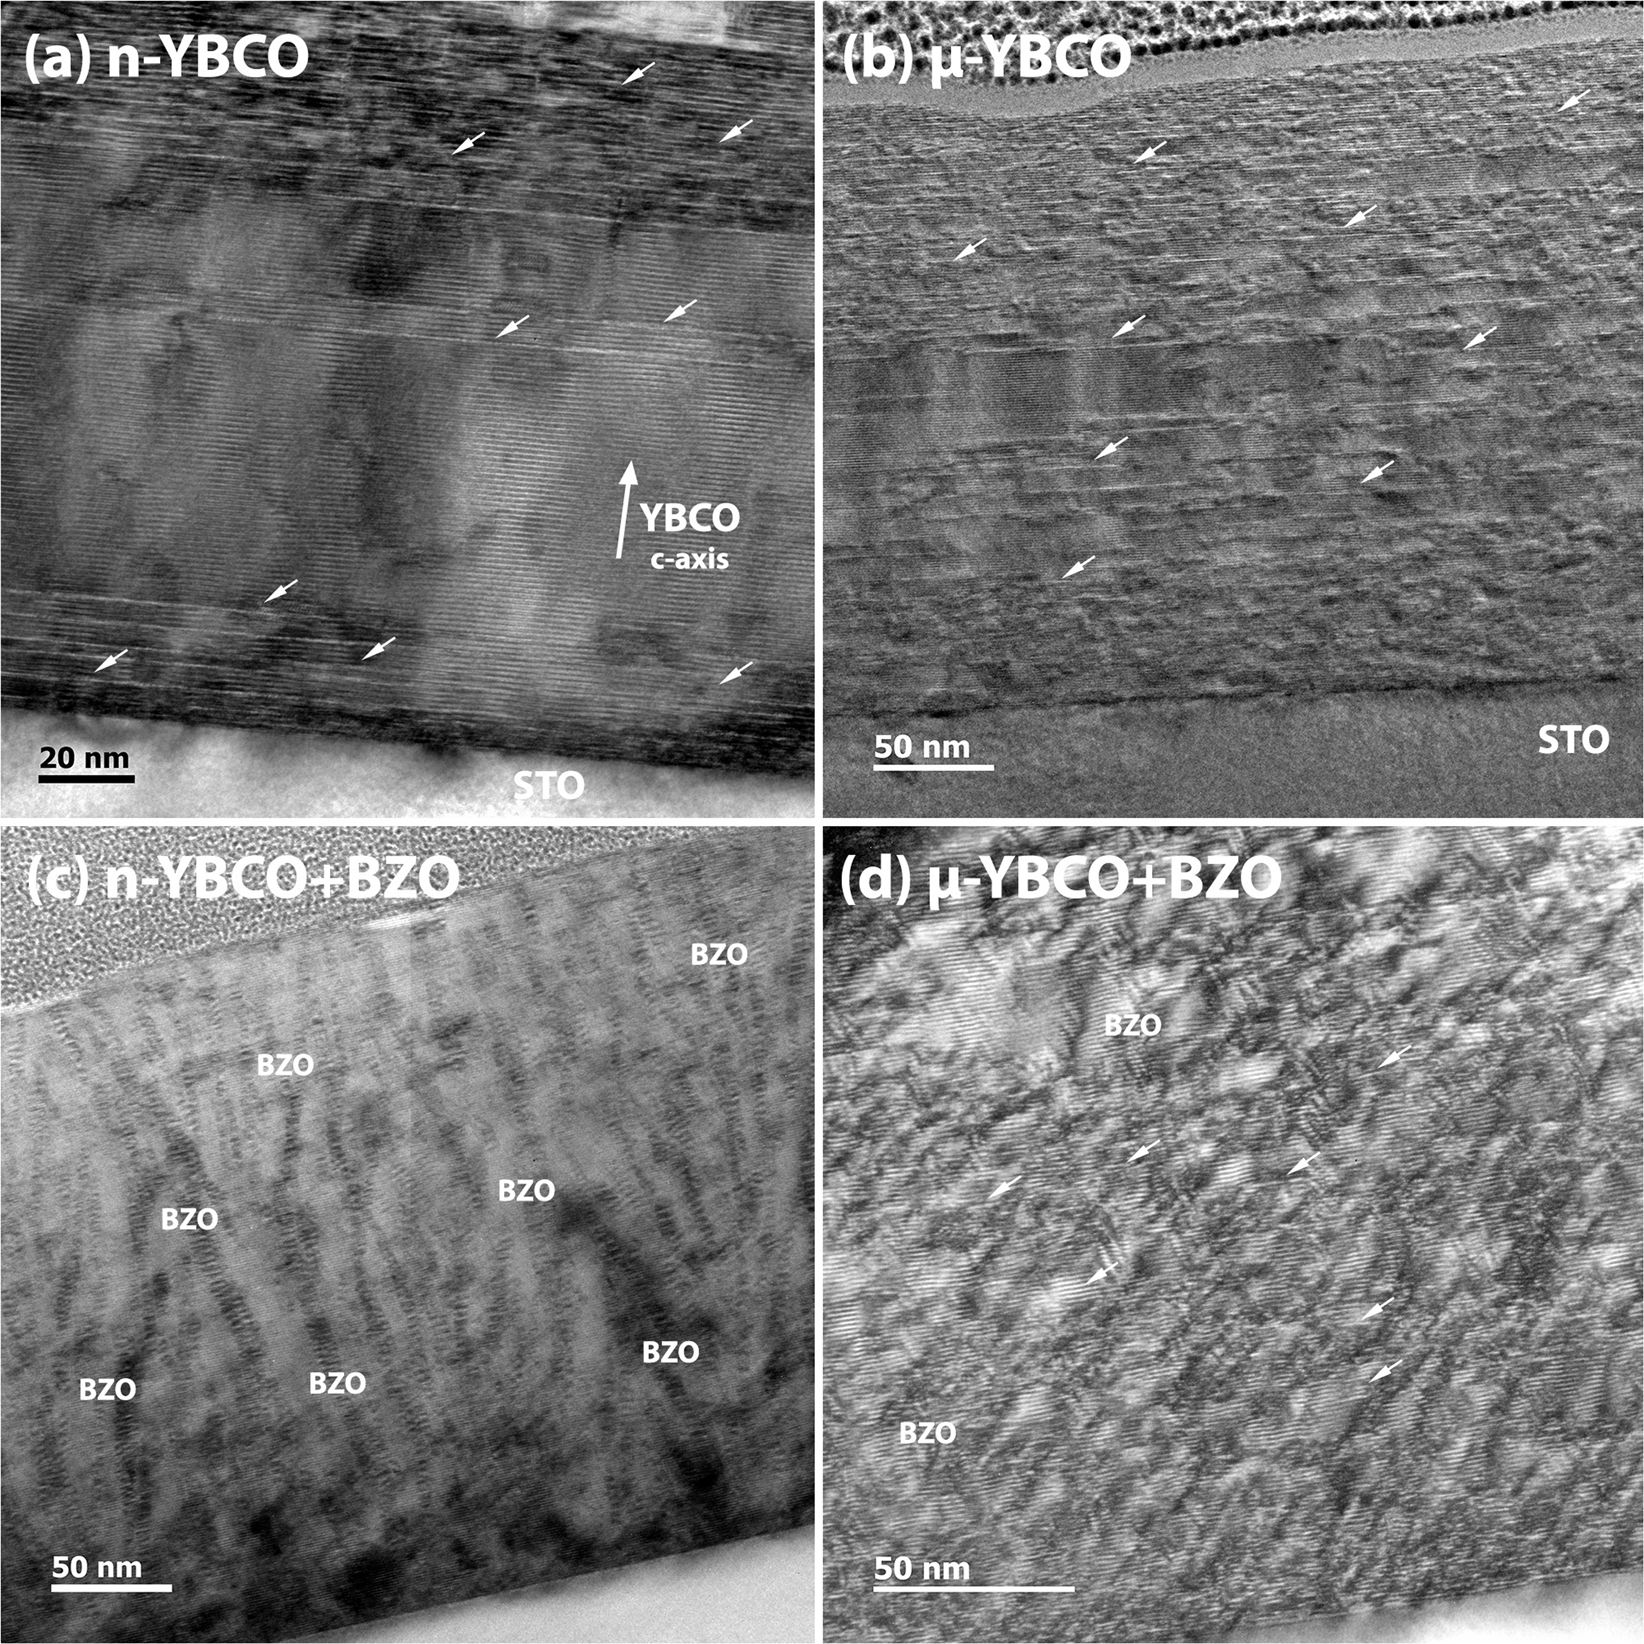 Enhanced flux pinning isotropy by tuned nanosized defect network in  superconducting YBa2Cu3O6+x films | Scientific Reports